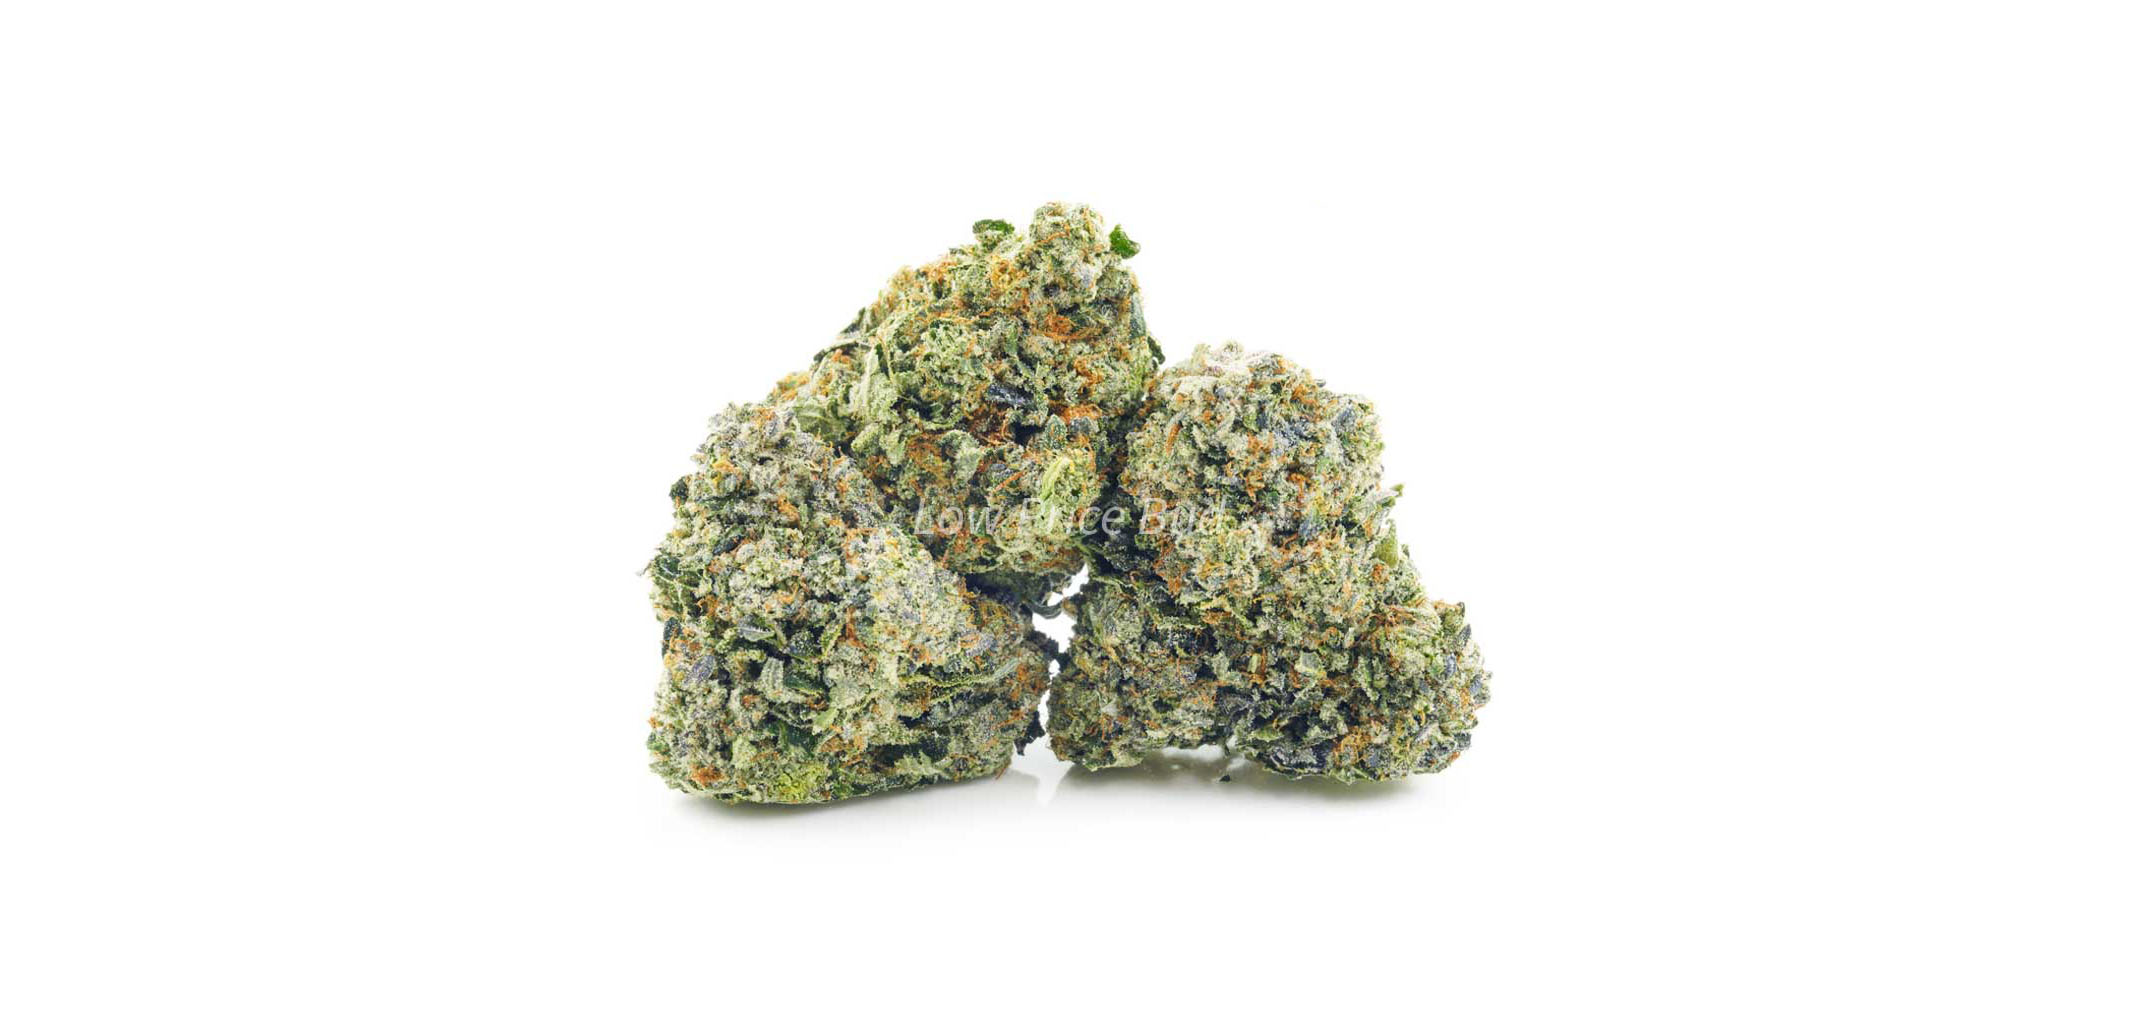 Pink Kush budget buds from low price bud dispensary for BC buds online. bc online dispensary. cheapest weed online canada. order weed canada.